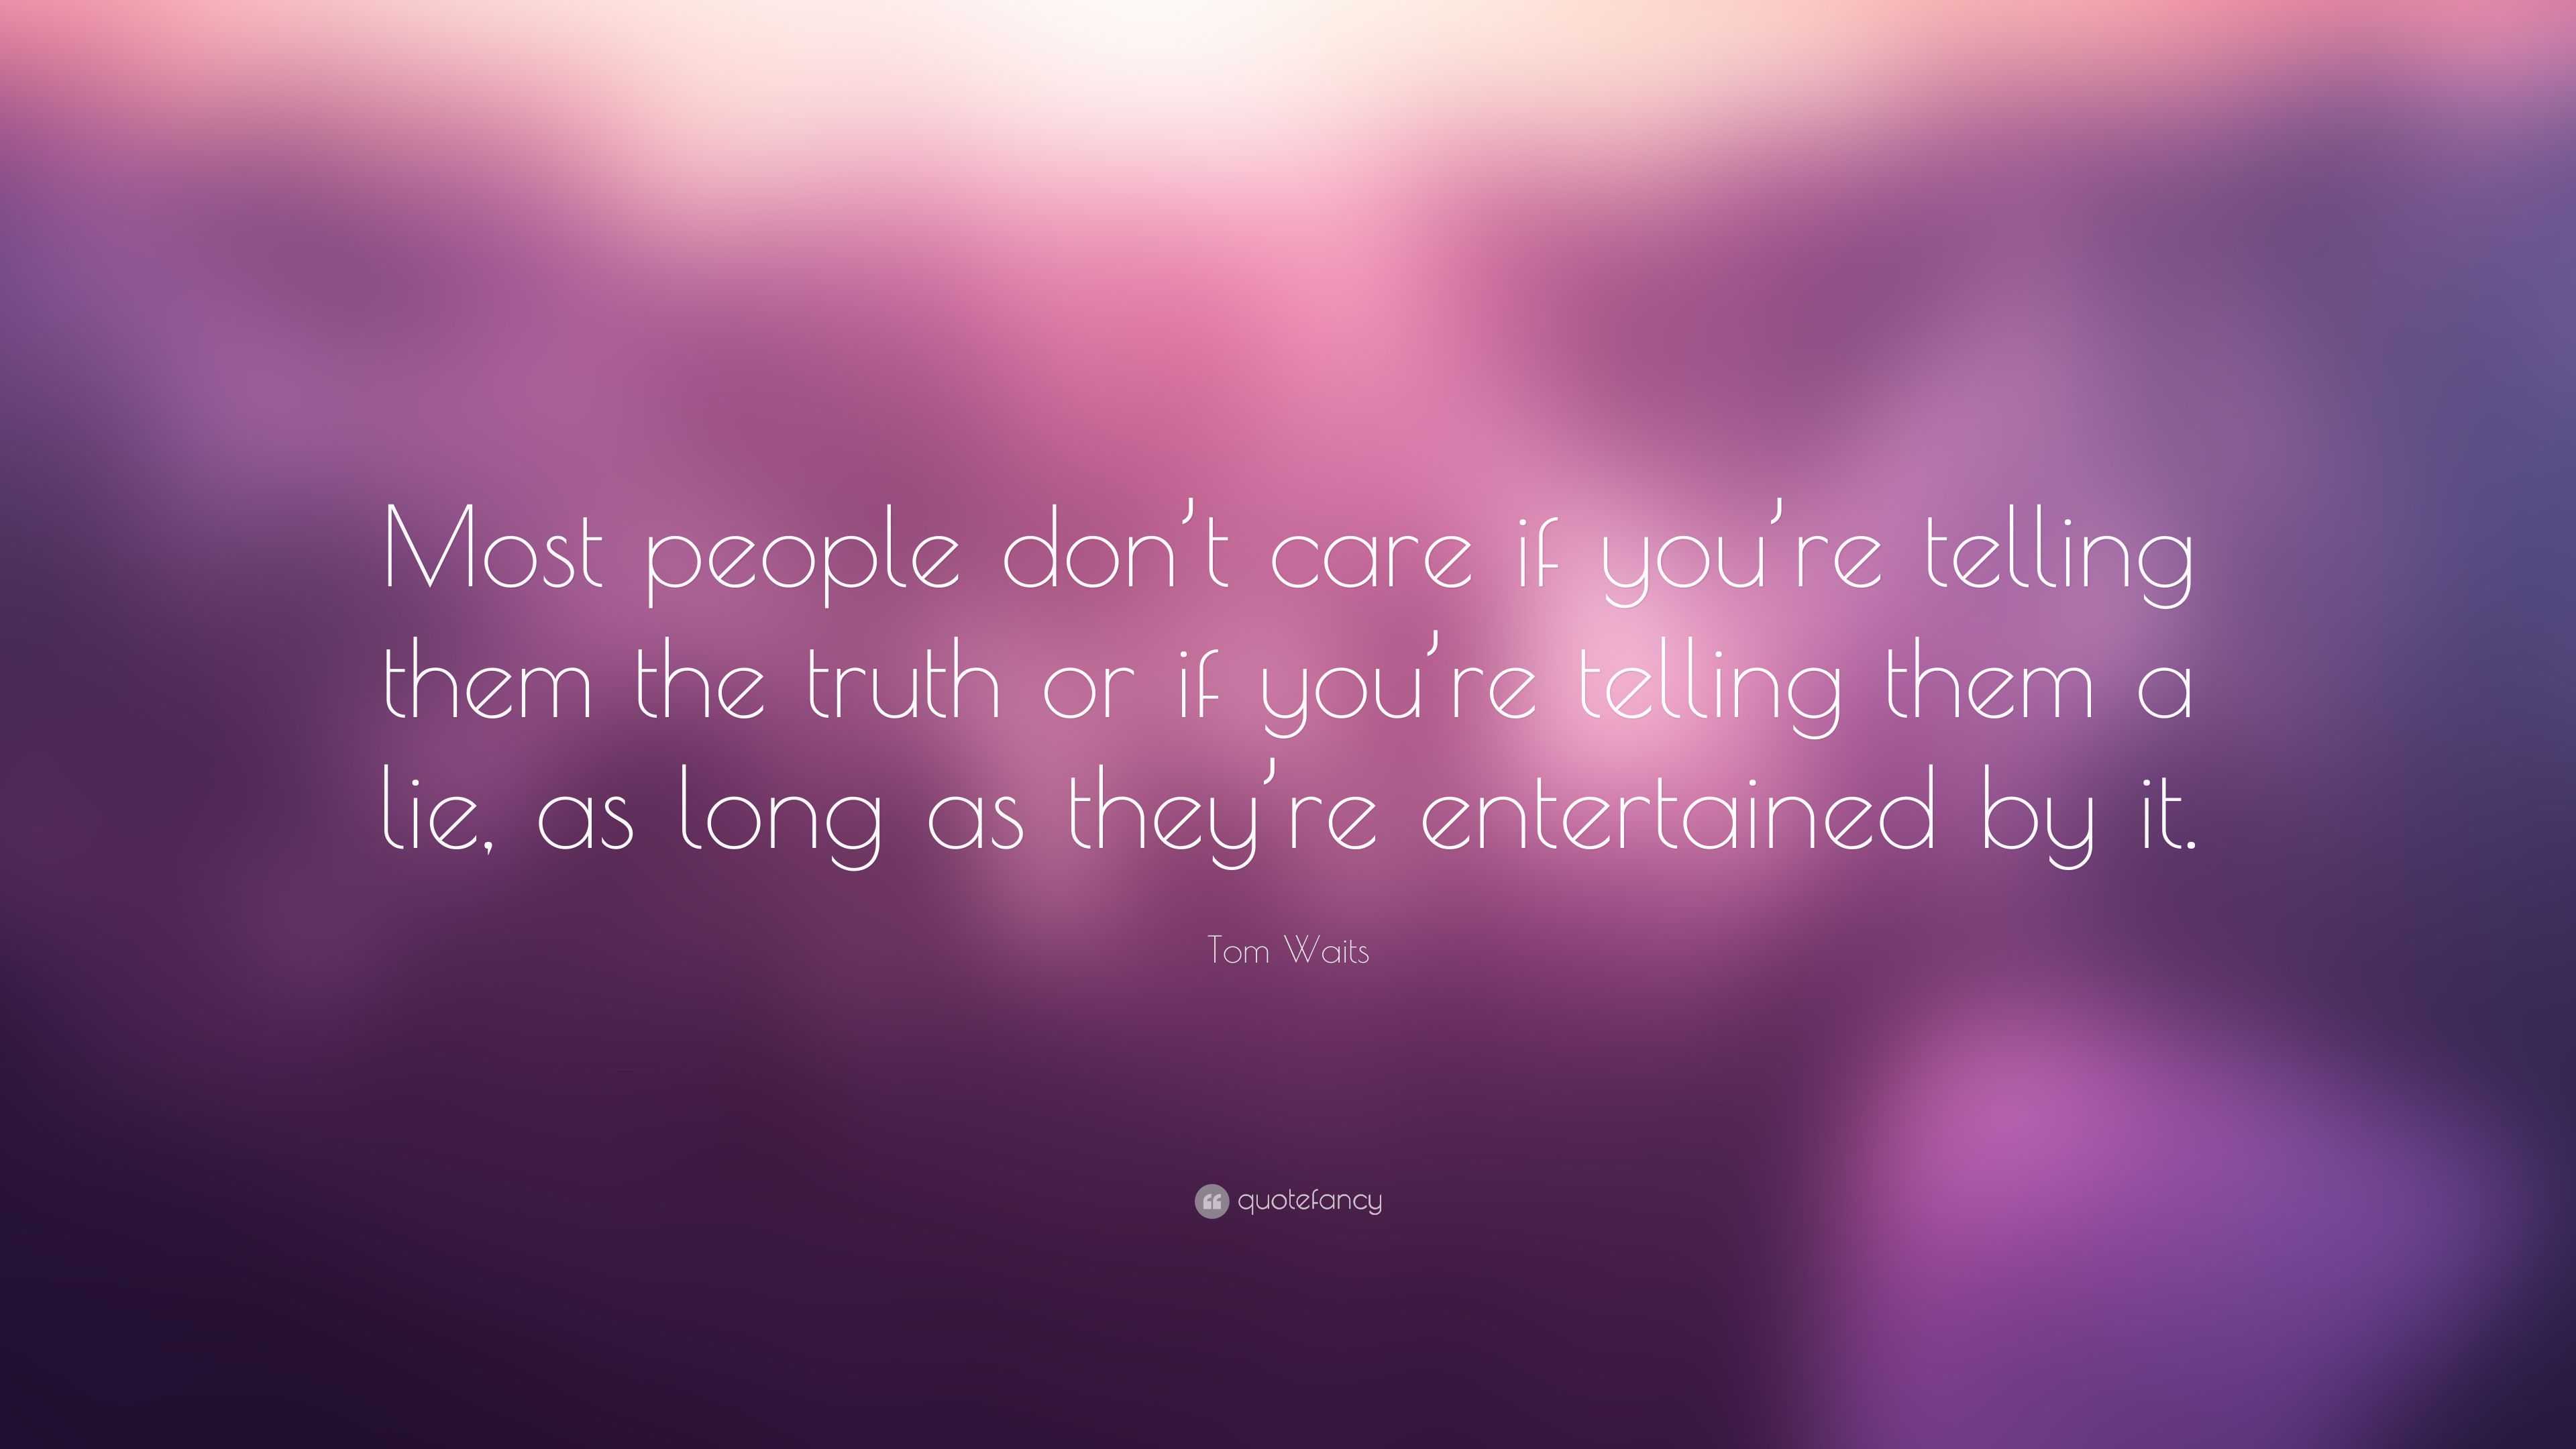 Tom Waits Quote: “Most people don’t care if you’re telling them the ...